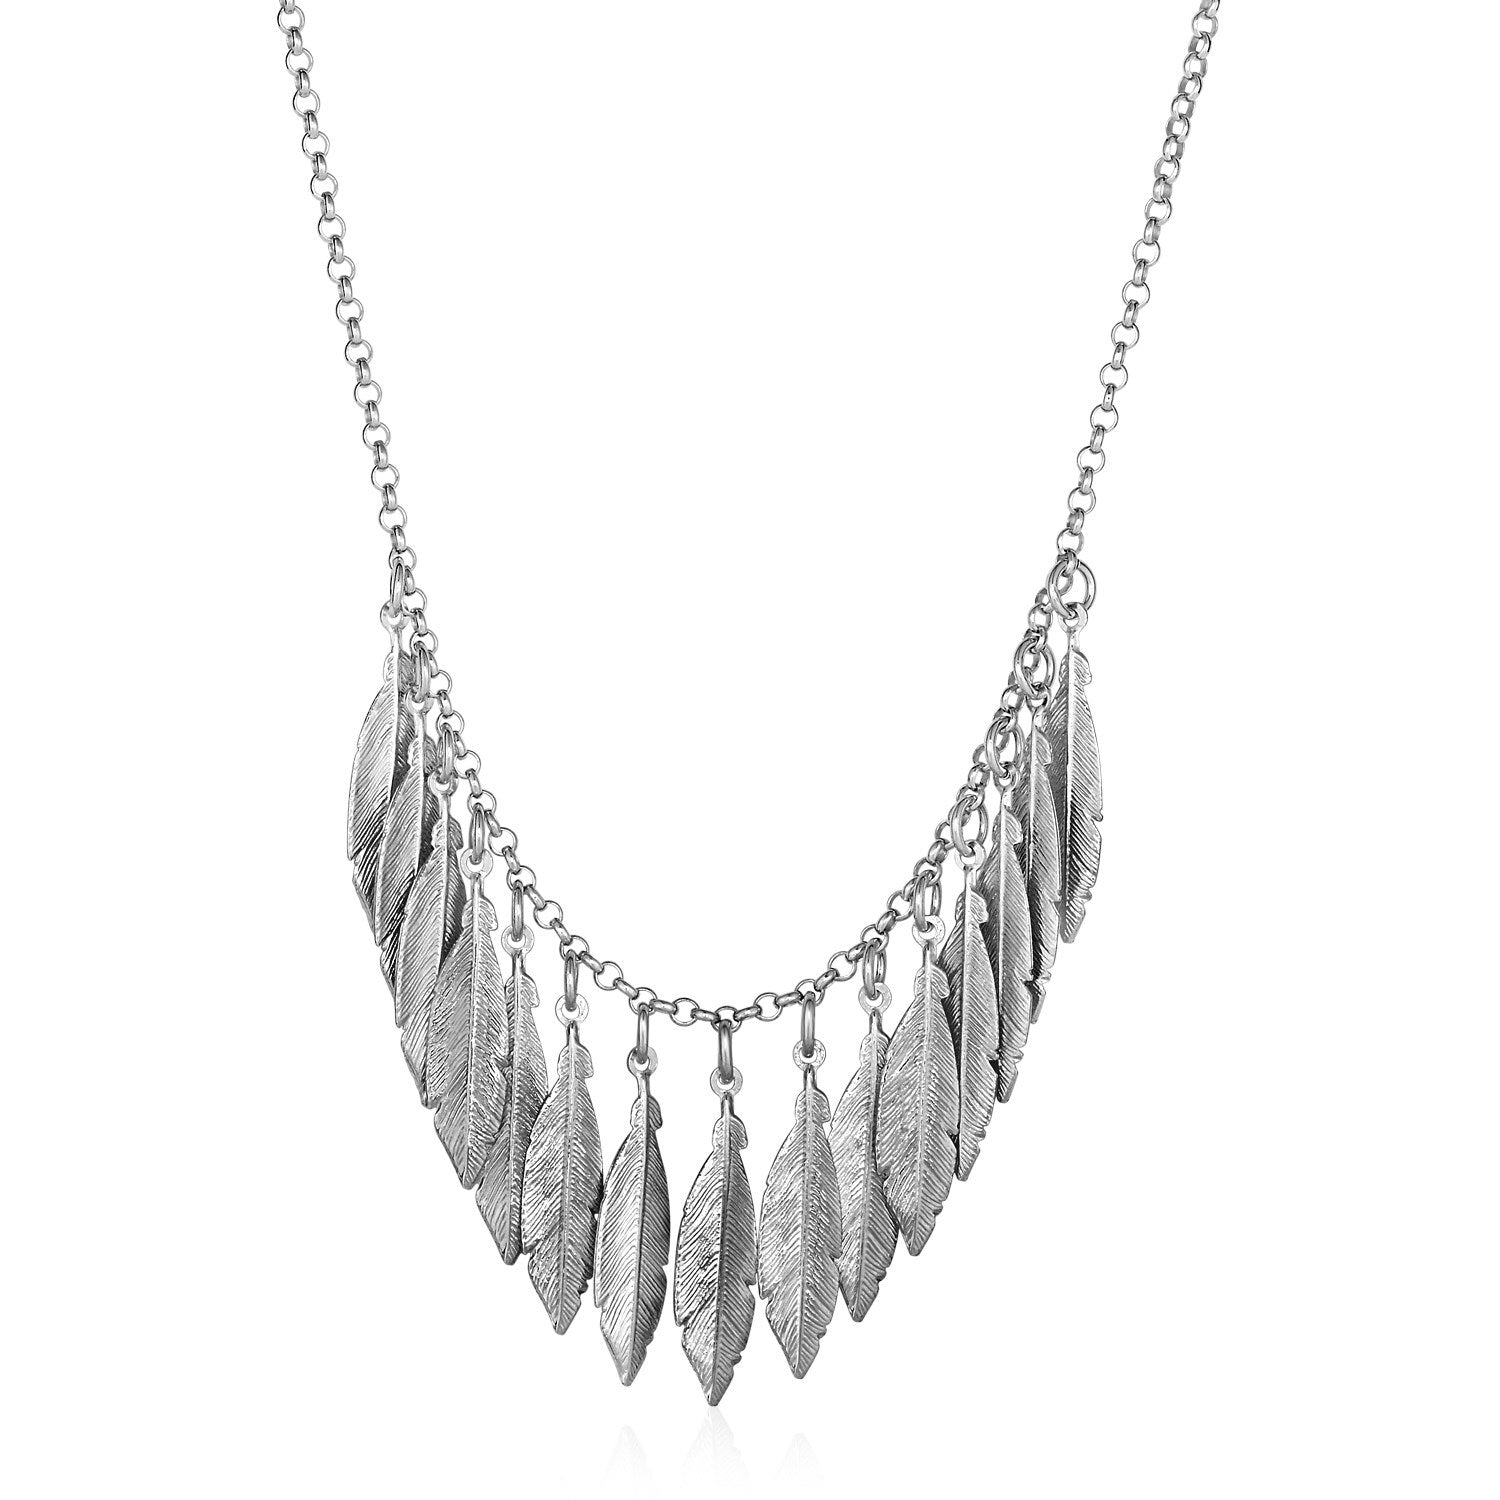 Necklace with Multiple Textured Leaf Drops in Sterling Silver, size 18''